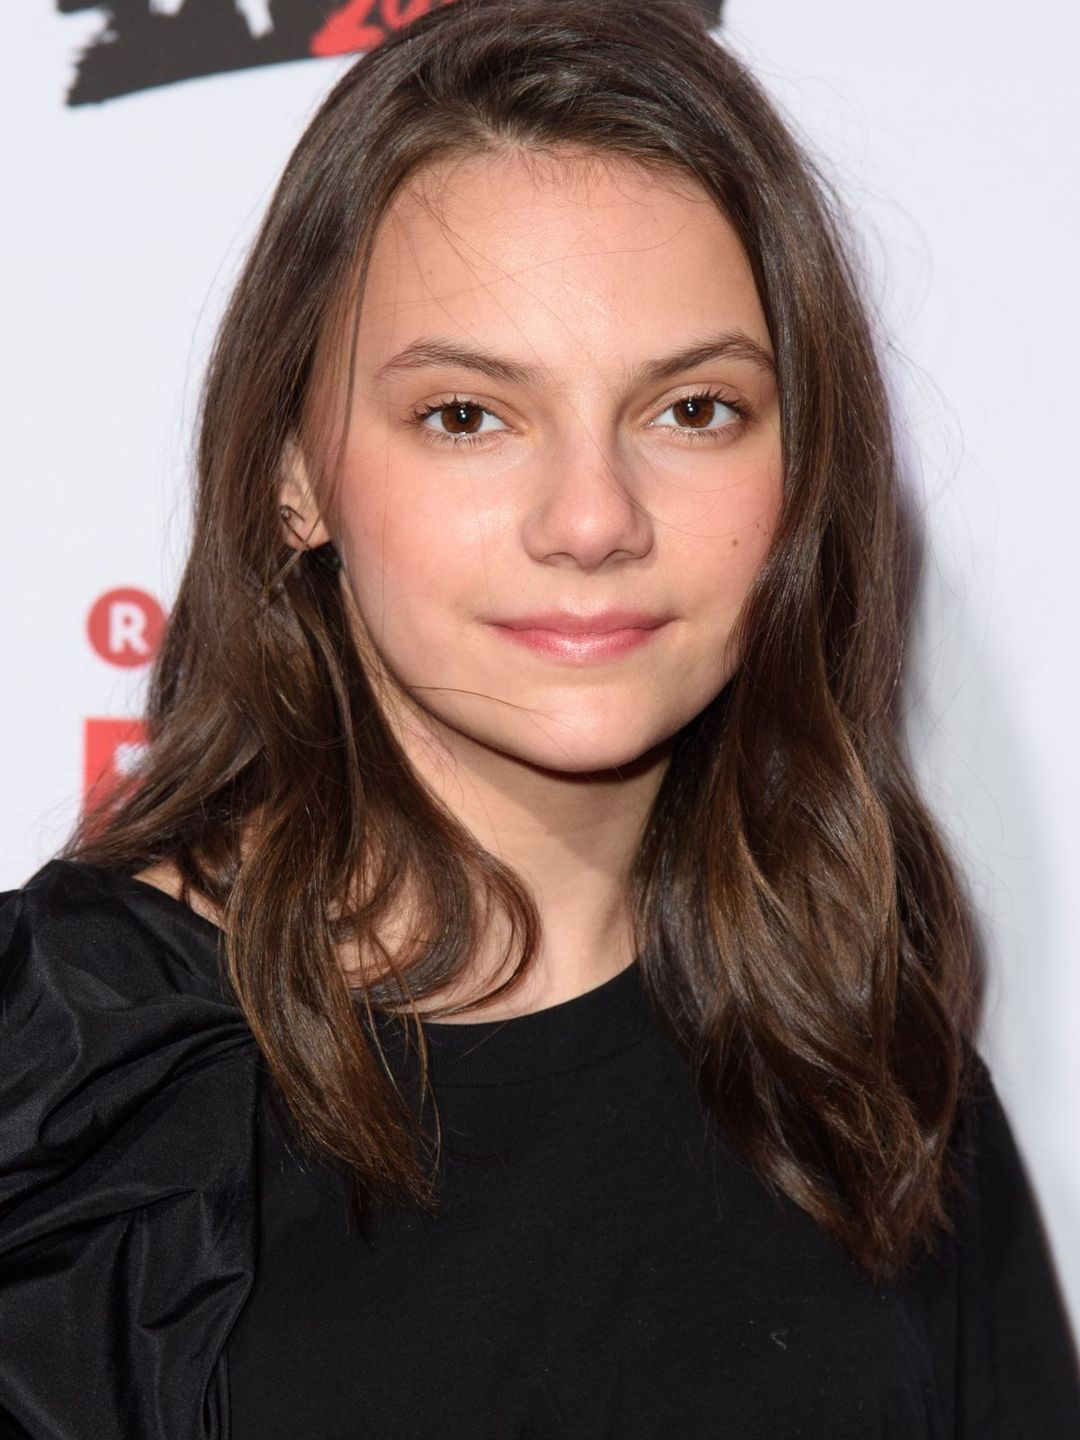 Dafne Keen unphotoshopped pictures